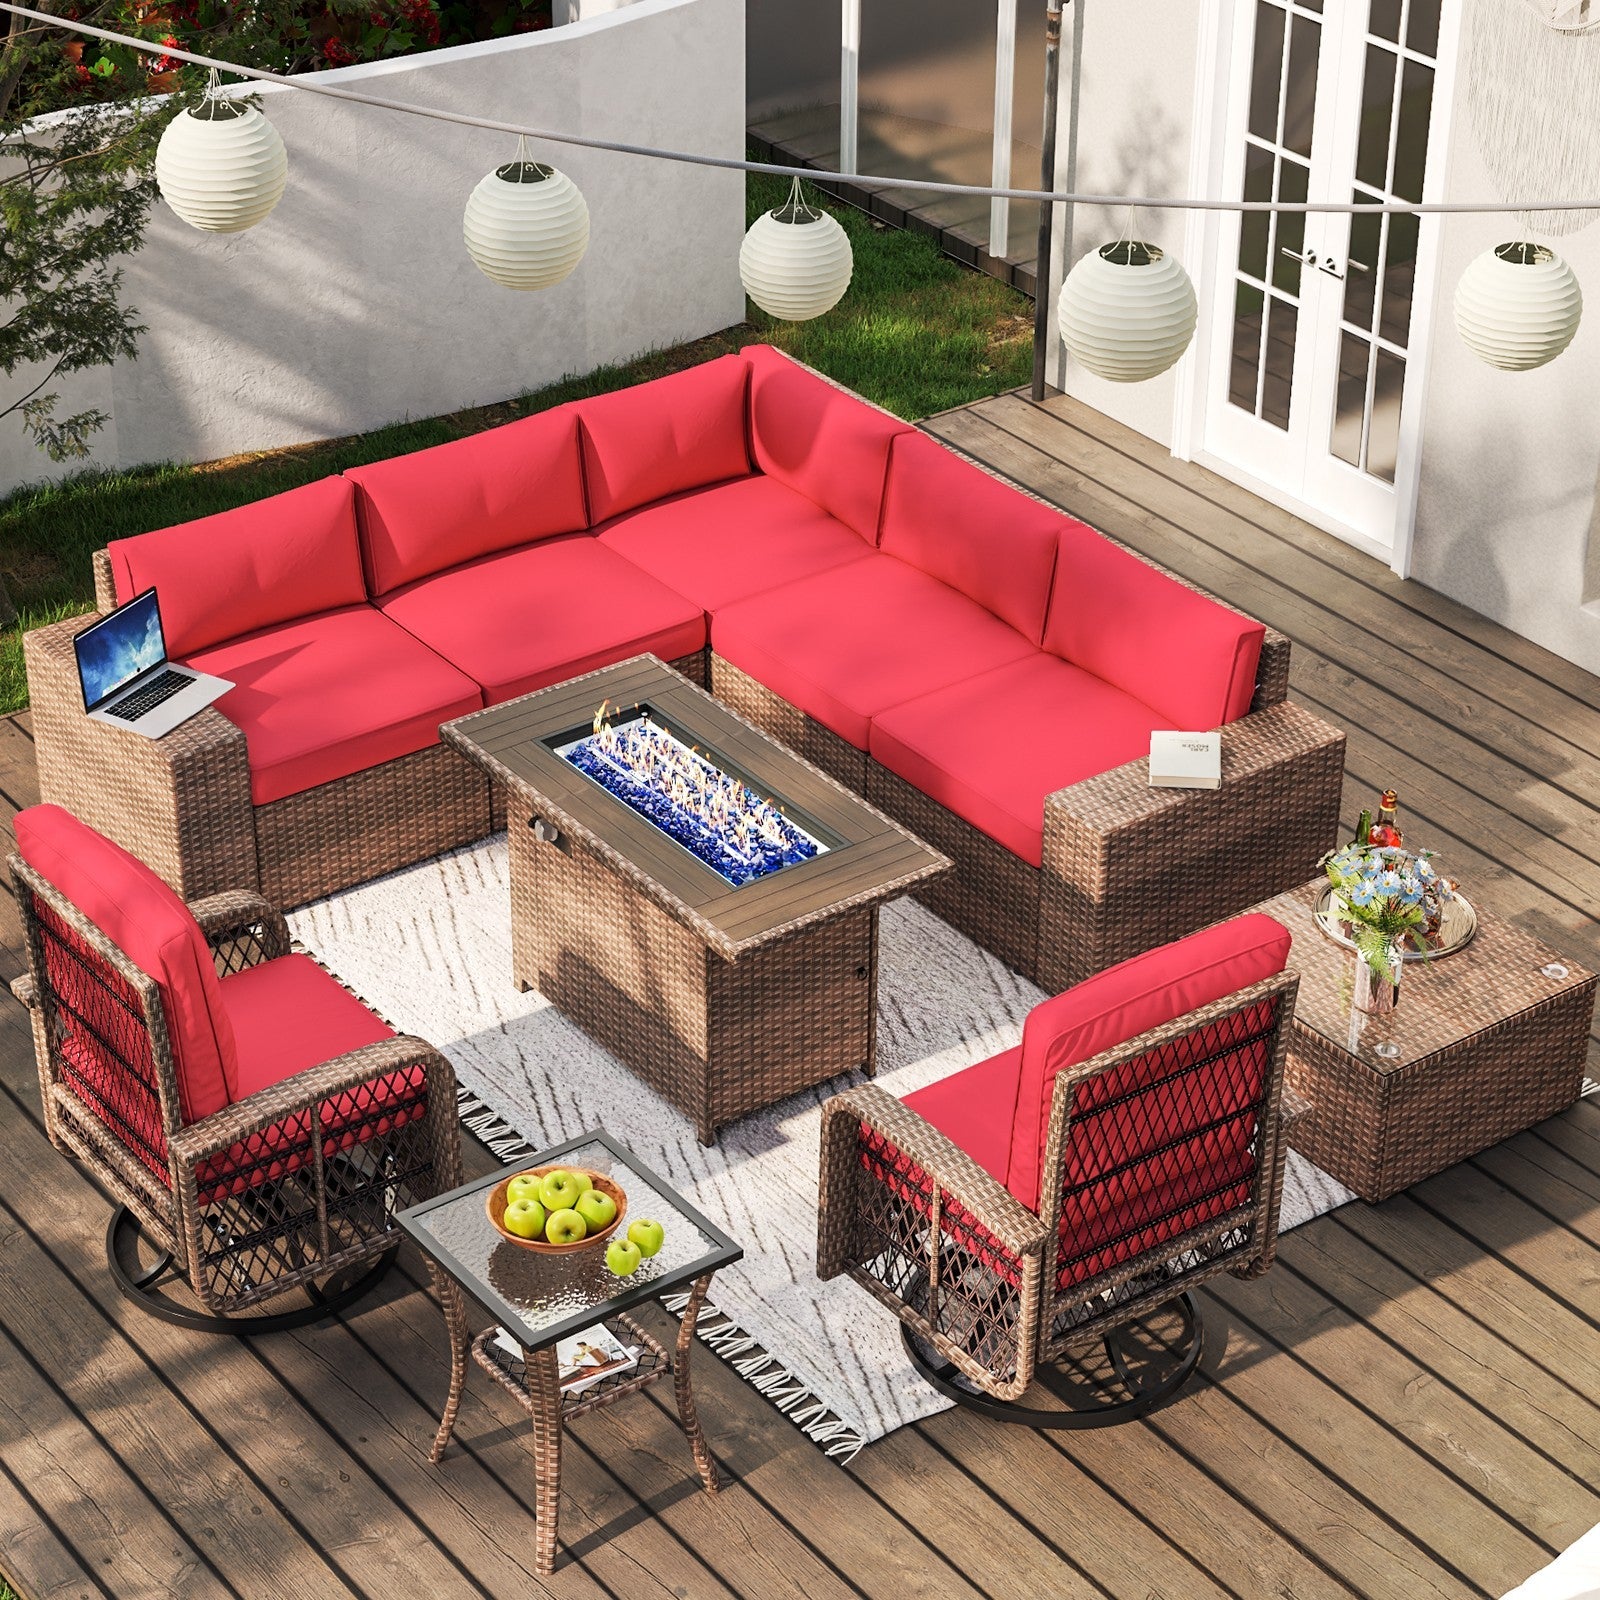 10 Pieces Patio Furniture Set Wicker Rattan Outdoor Furniture with Fire Pit Table Patio Sectional Sofa with Swivel Rocking Chairs for Deck, Backyard and Garden (Beige/Blue/Red)